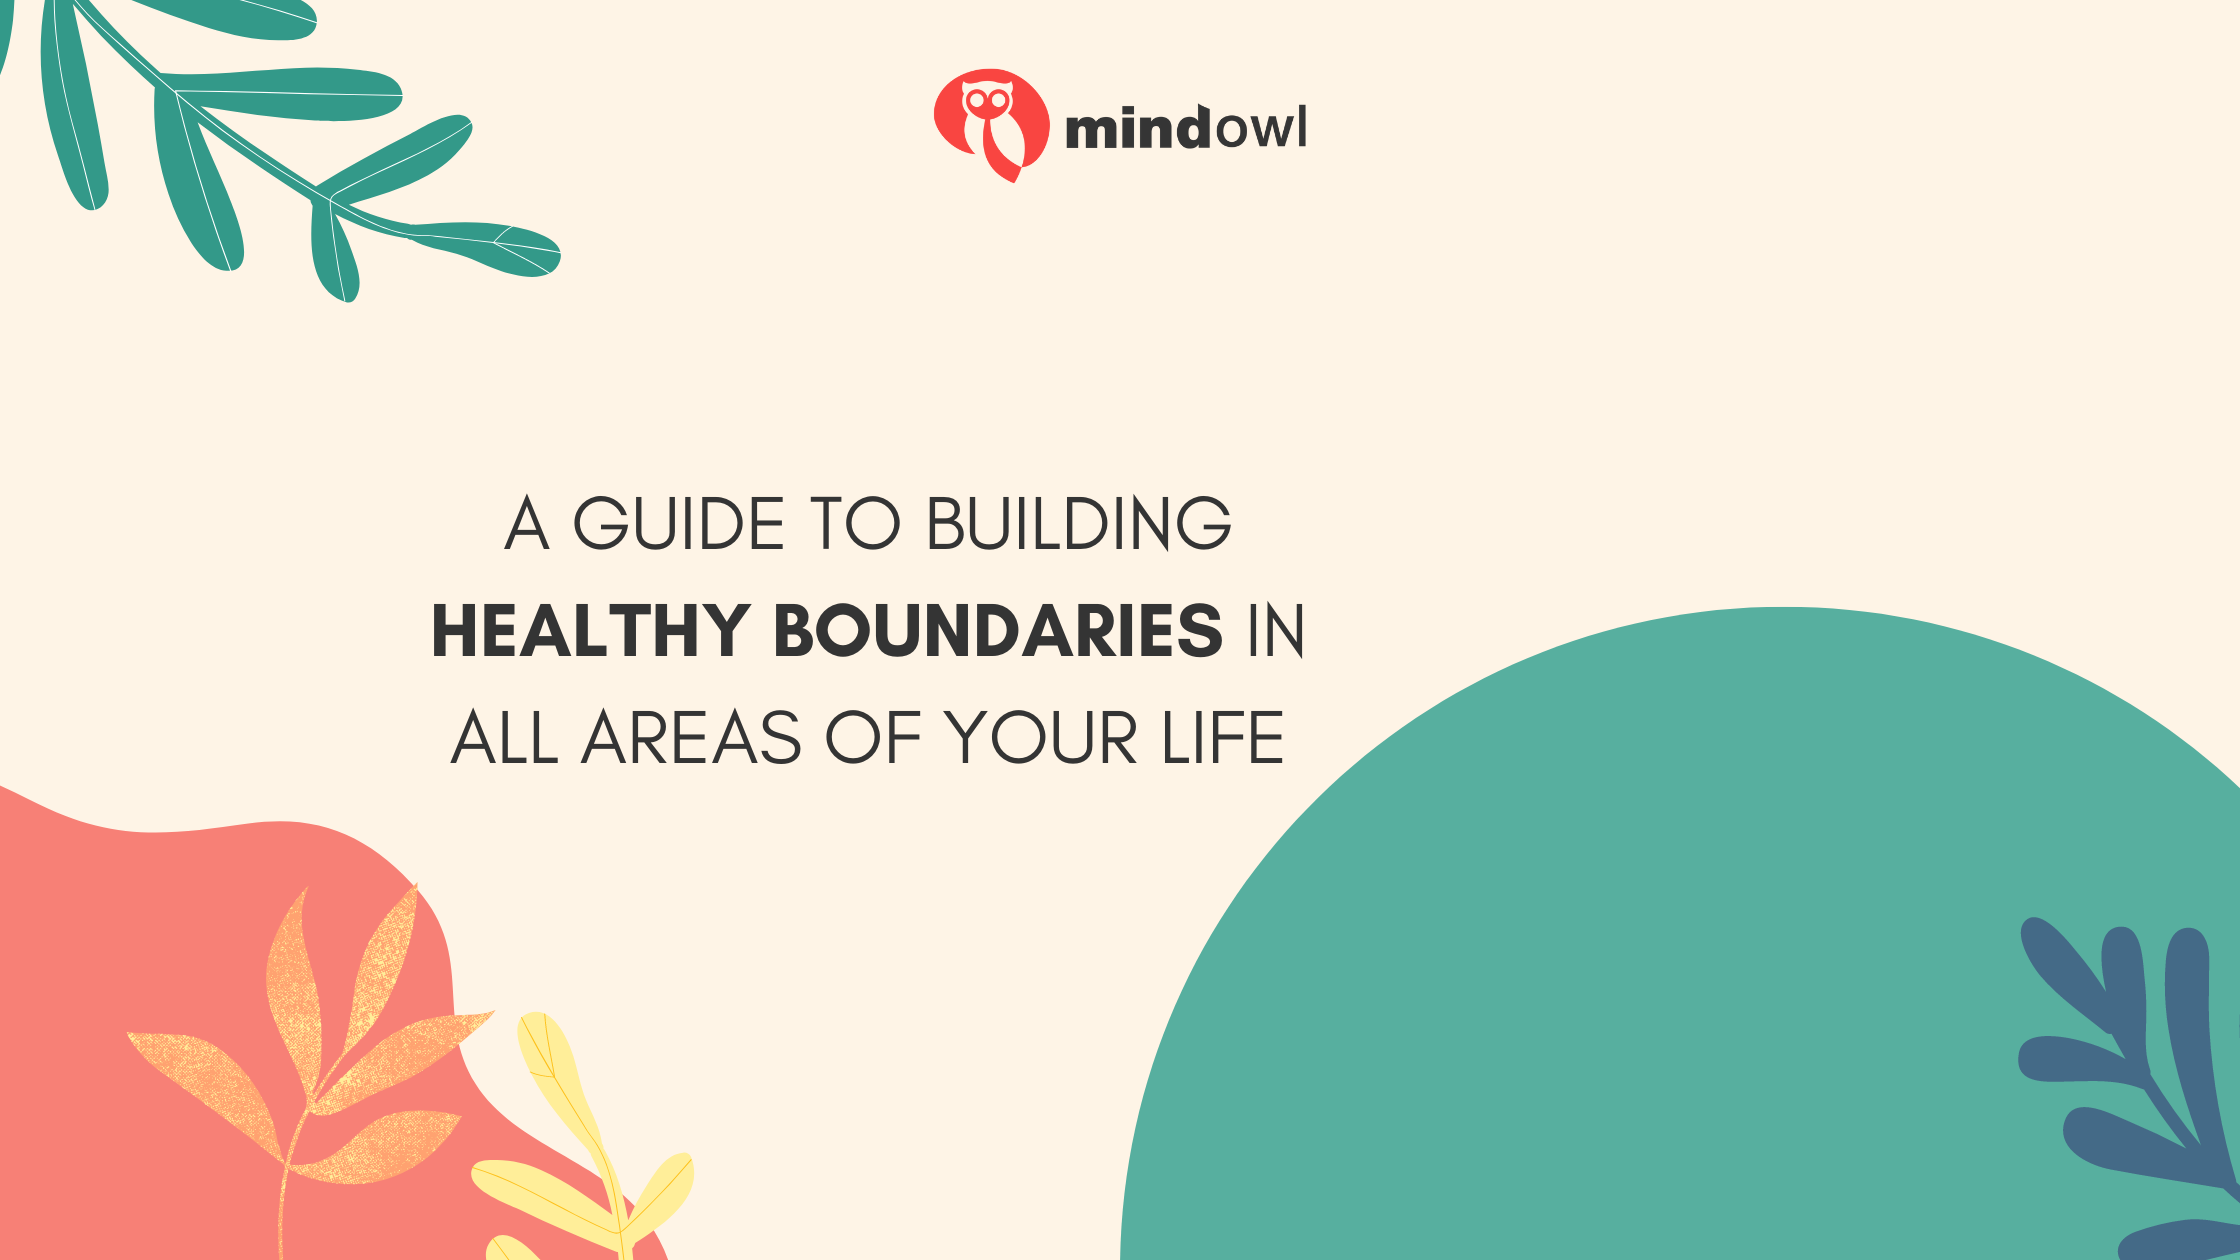 A Guide to Building Healthy Boundaries in All Areas of Your Life